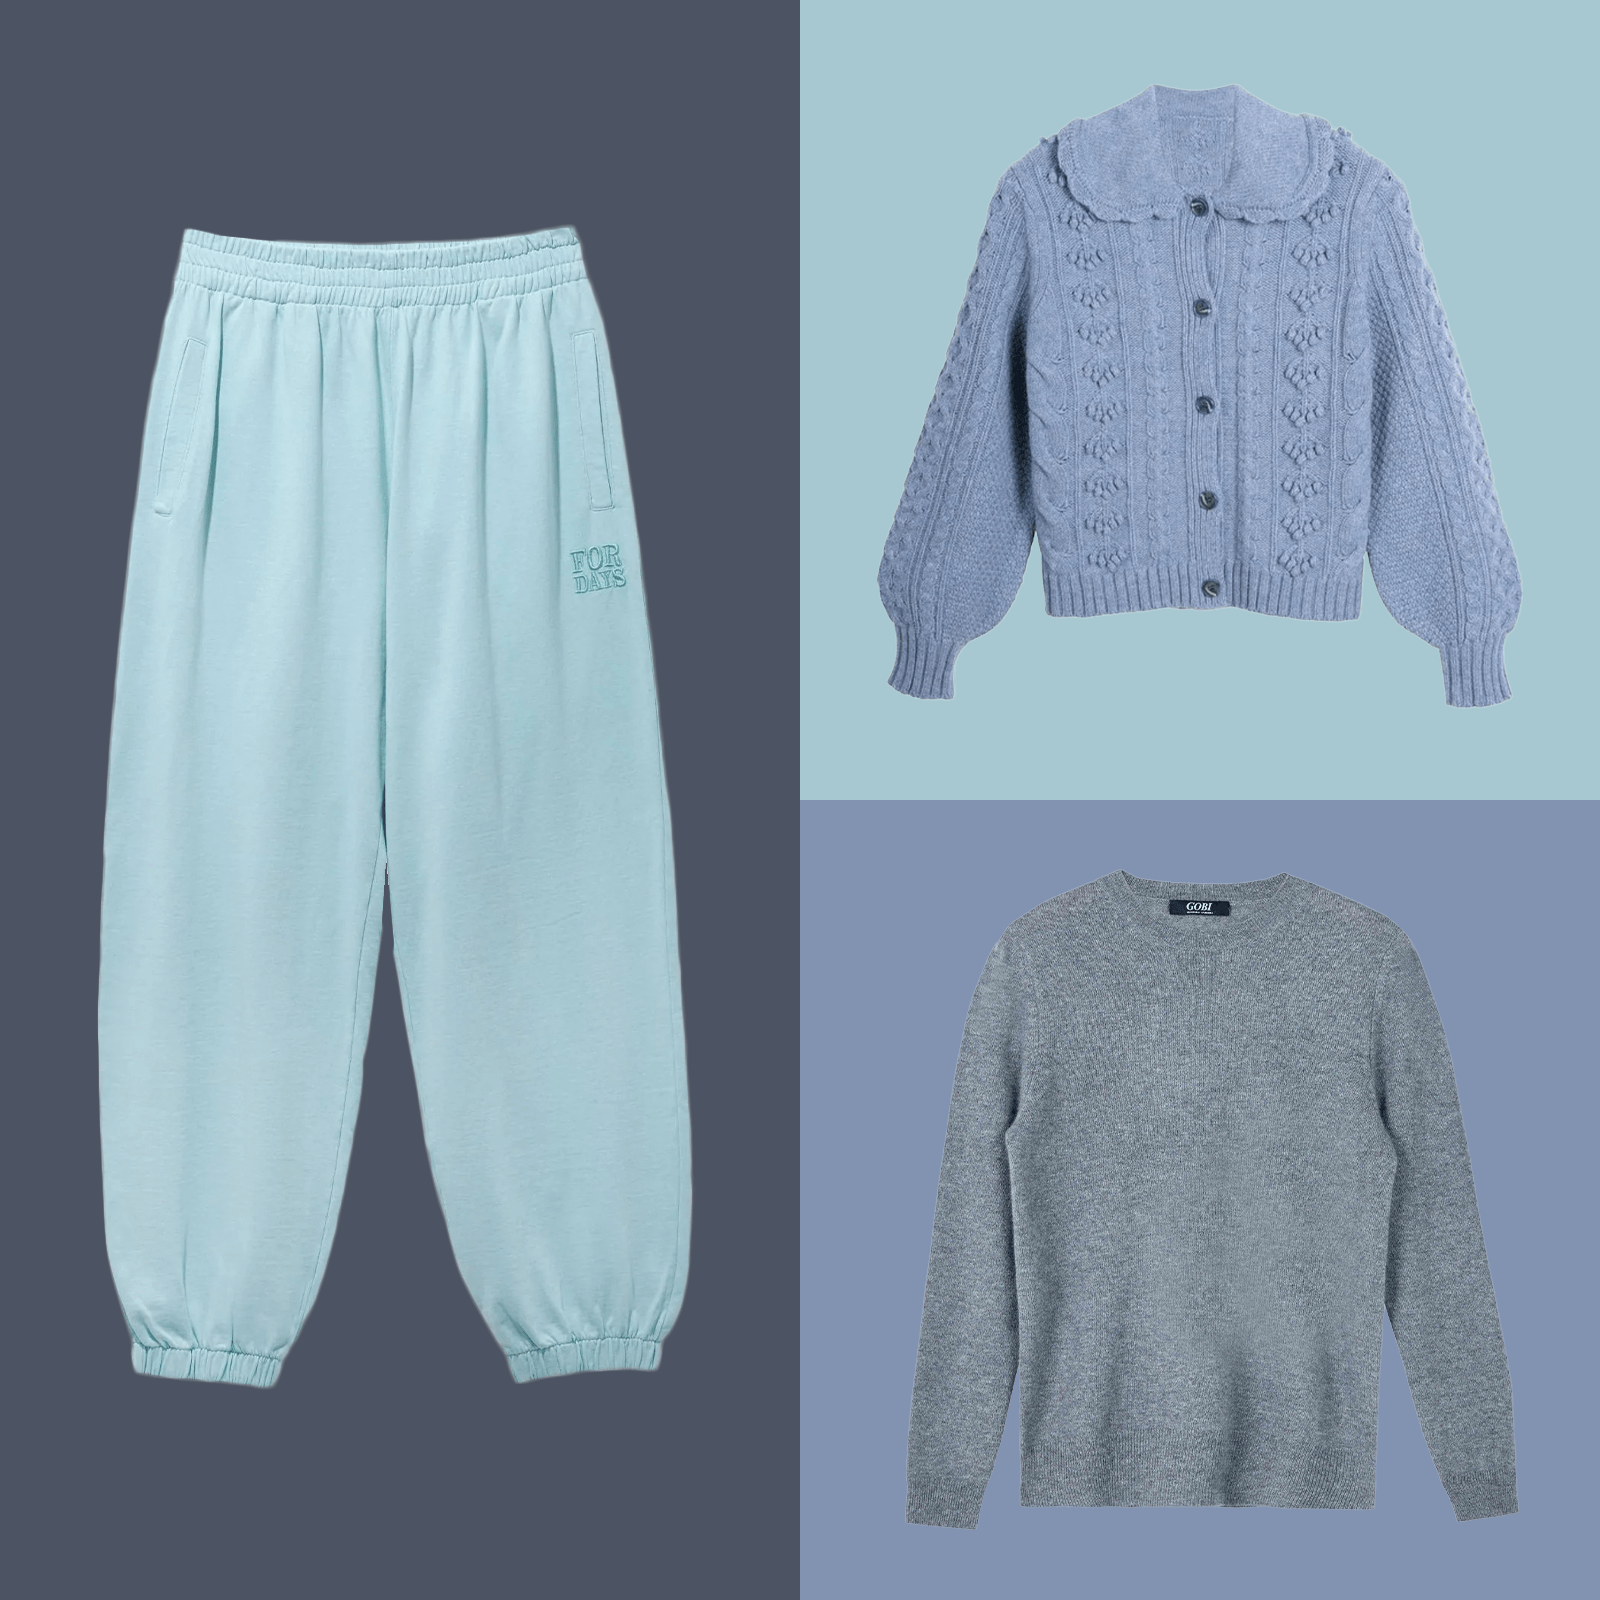 This Oprah-Favorite Cozy Loungewear Brand Is Up to 60% Off